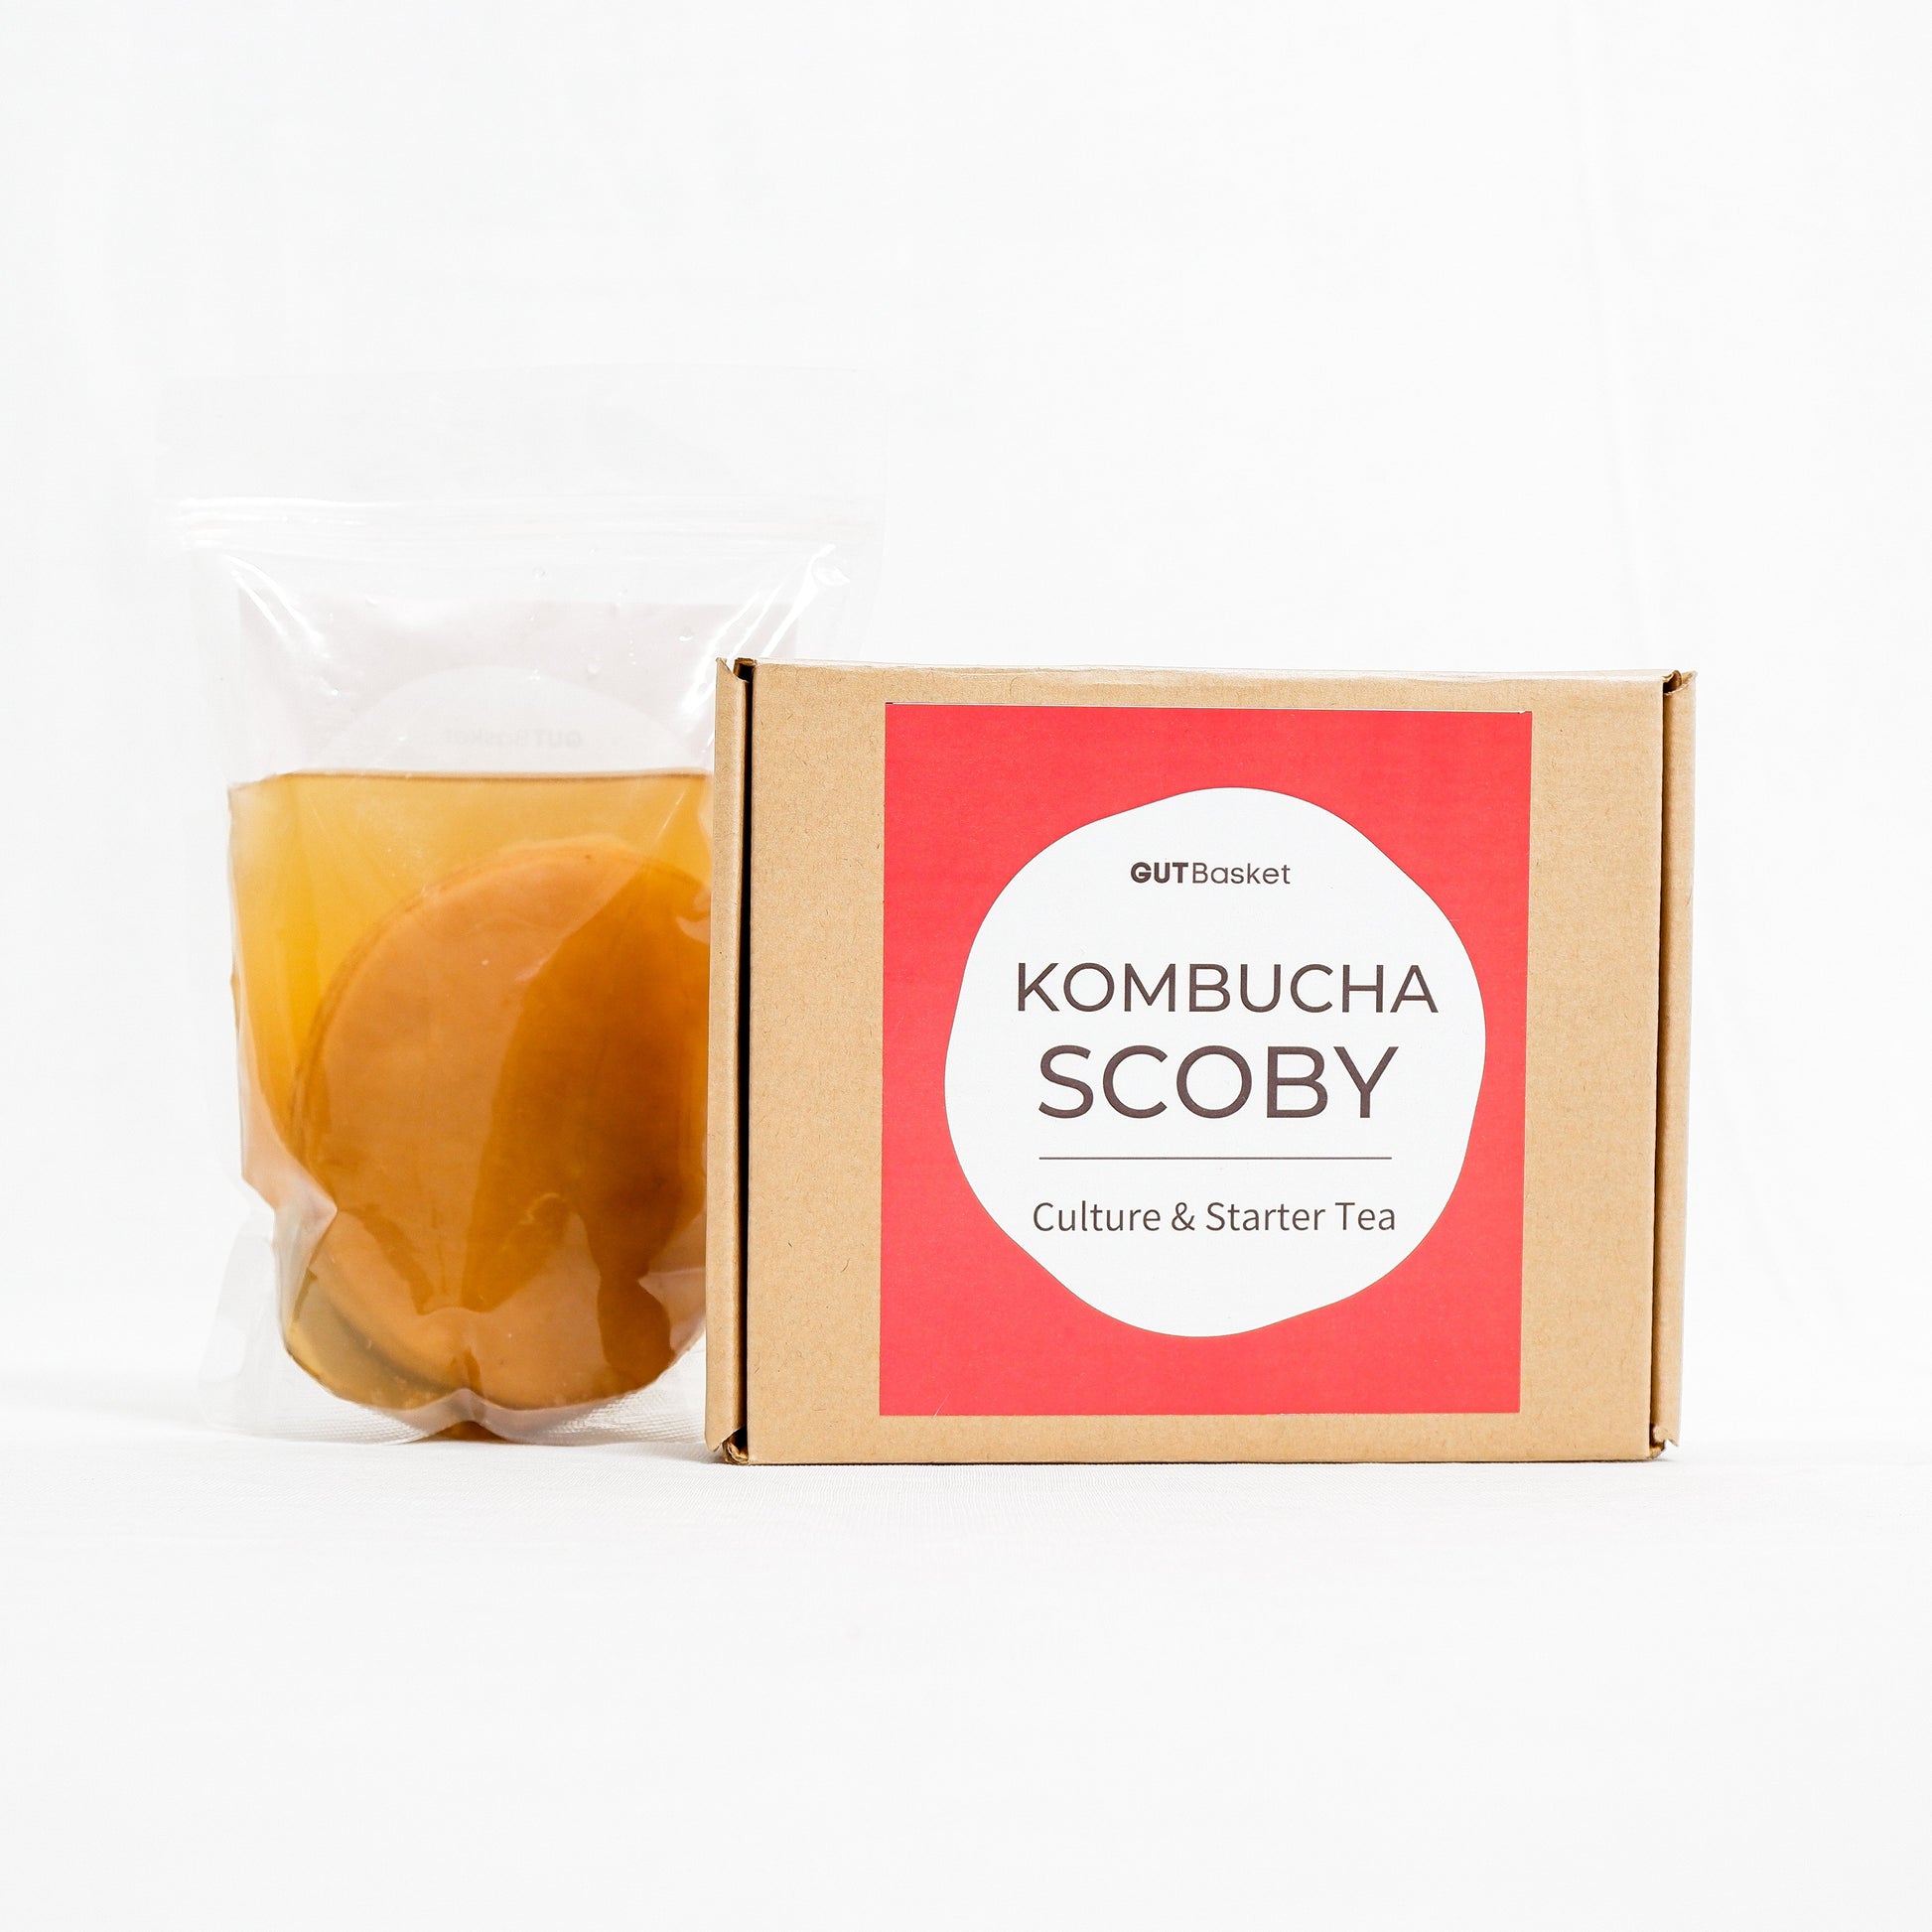 Kombucha Scoby And Stater Tea - Gutbasket